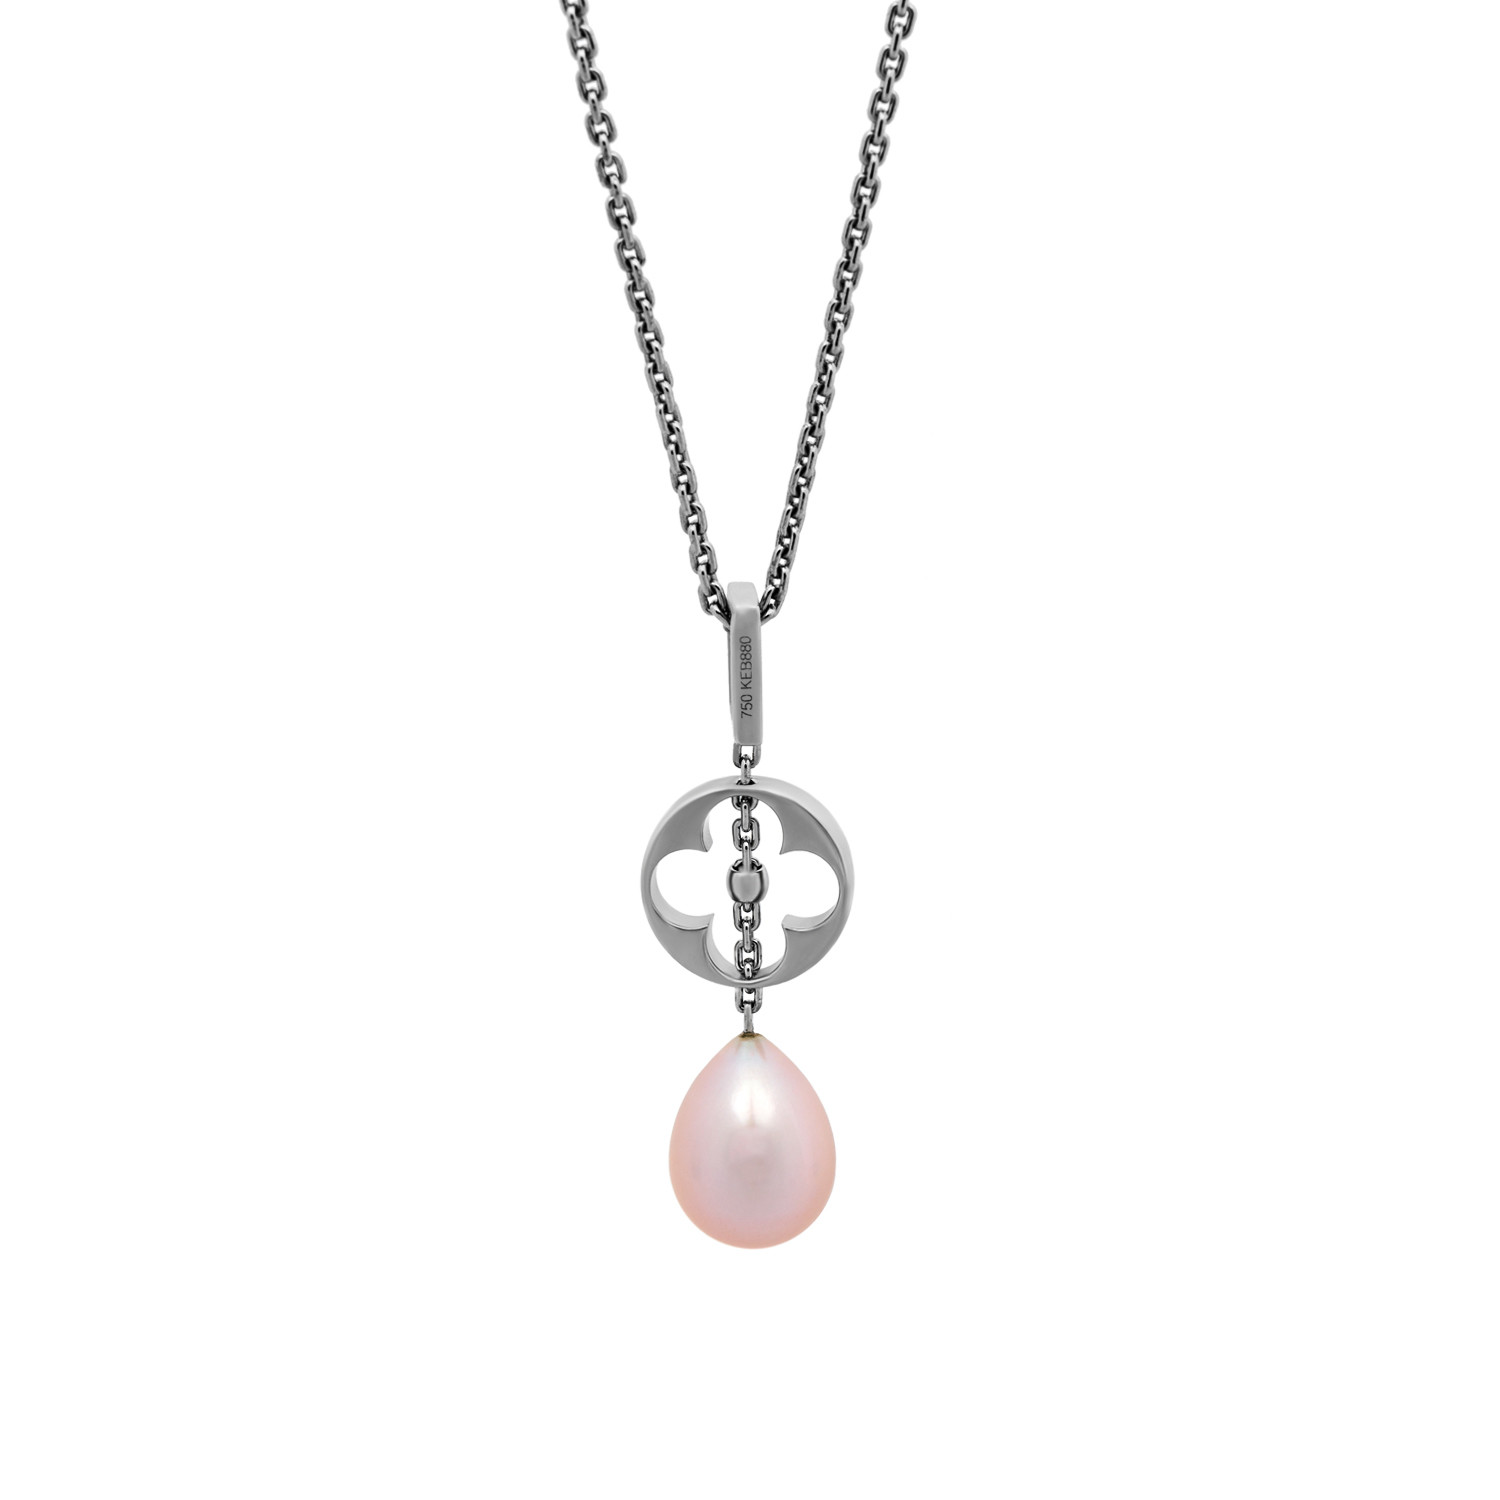 Louis Vuitton 18k White Gold Empreinte Pearl Necklace // Pre-Owned - Luxury Jewelry - Touch of ...